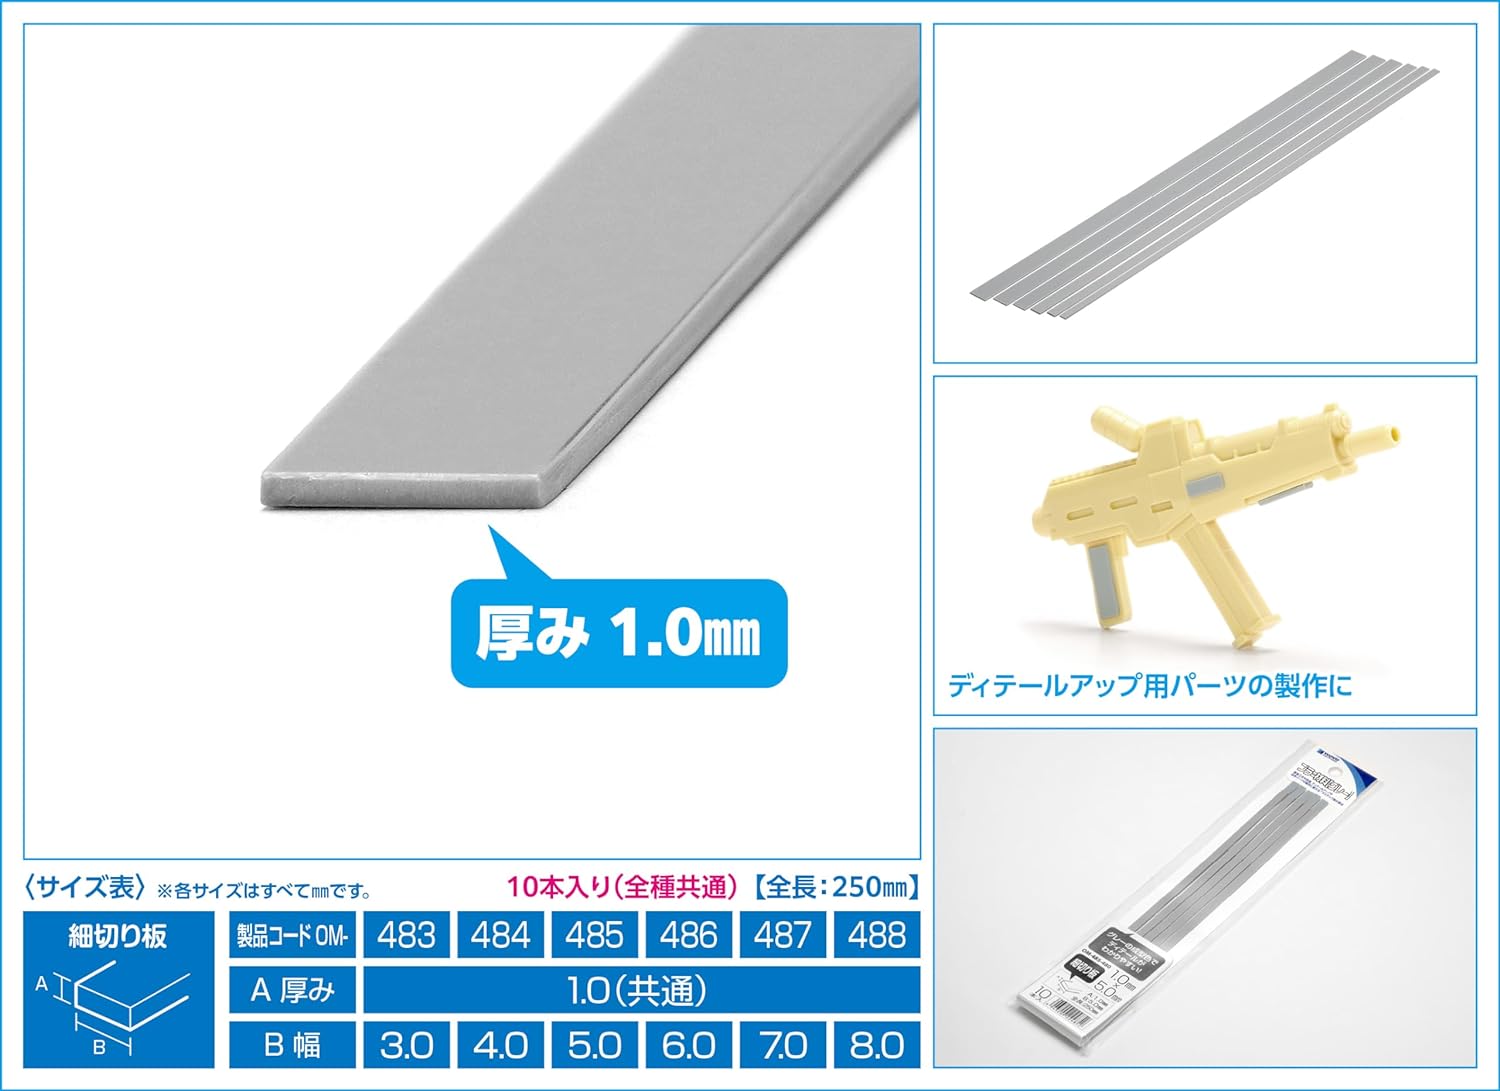 Wave Material Series OM-487 Plastic Material Gray Shredded Board 0.04 x 0.28 inches (1.0 x 7.0 mm), 10 Pieces - BanzaiHobby